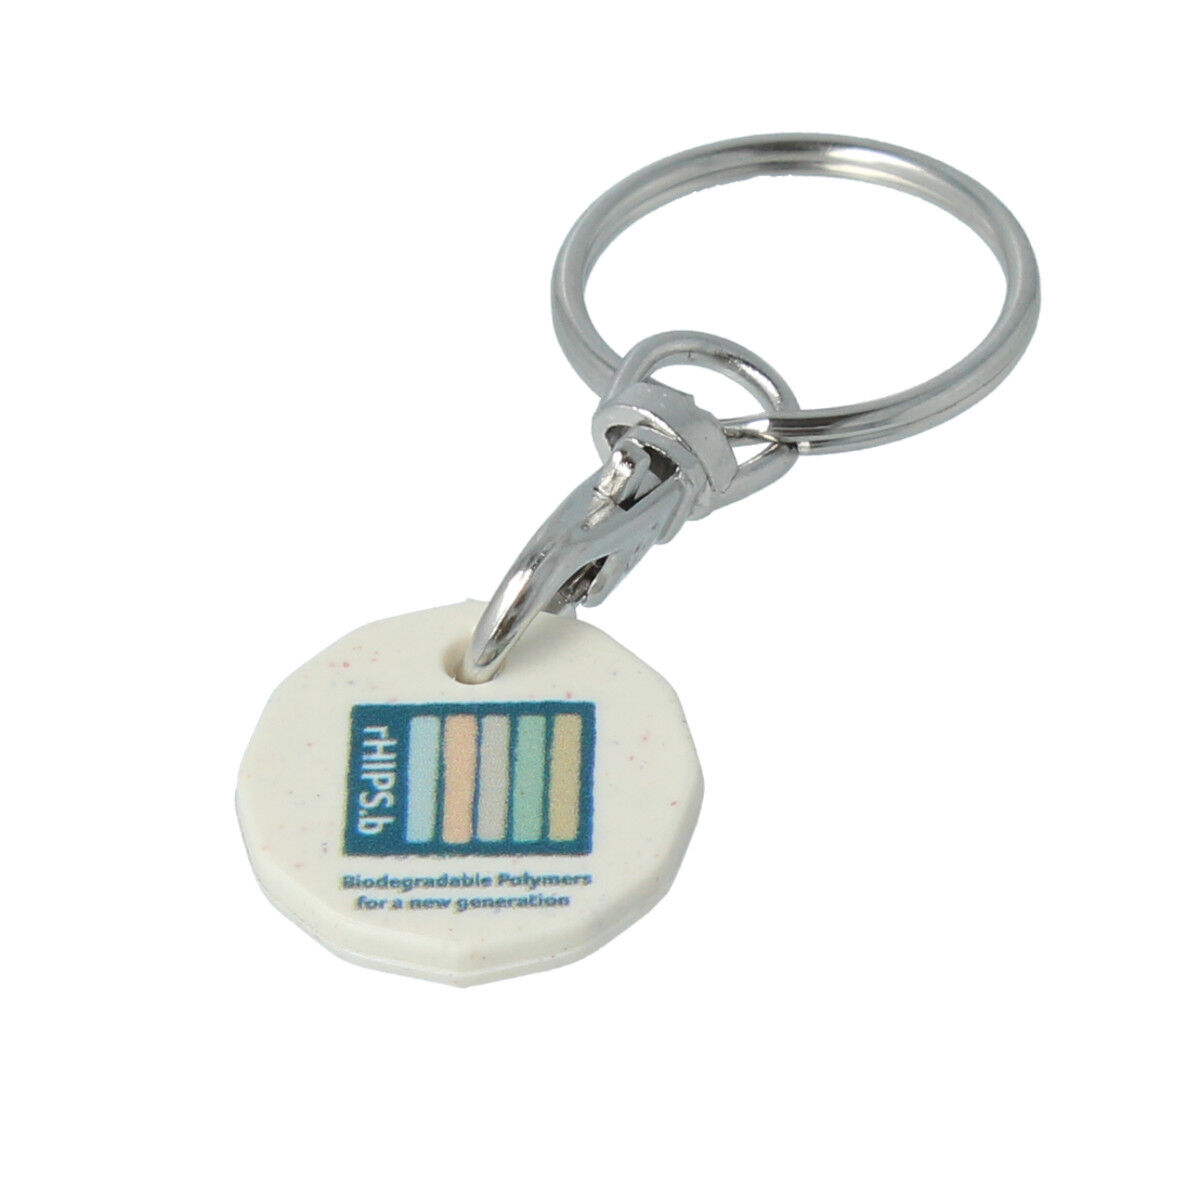 Recycled Plastic rHIPS Trolley Coin Keyring (tor colour)